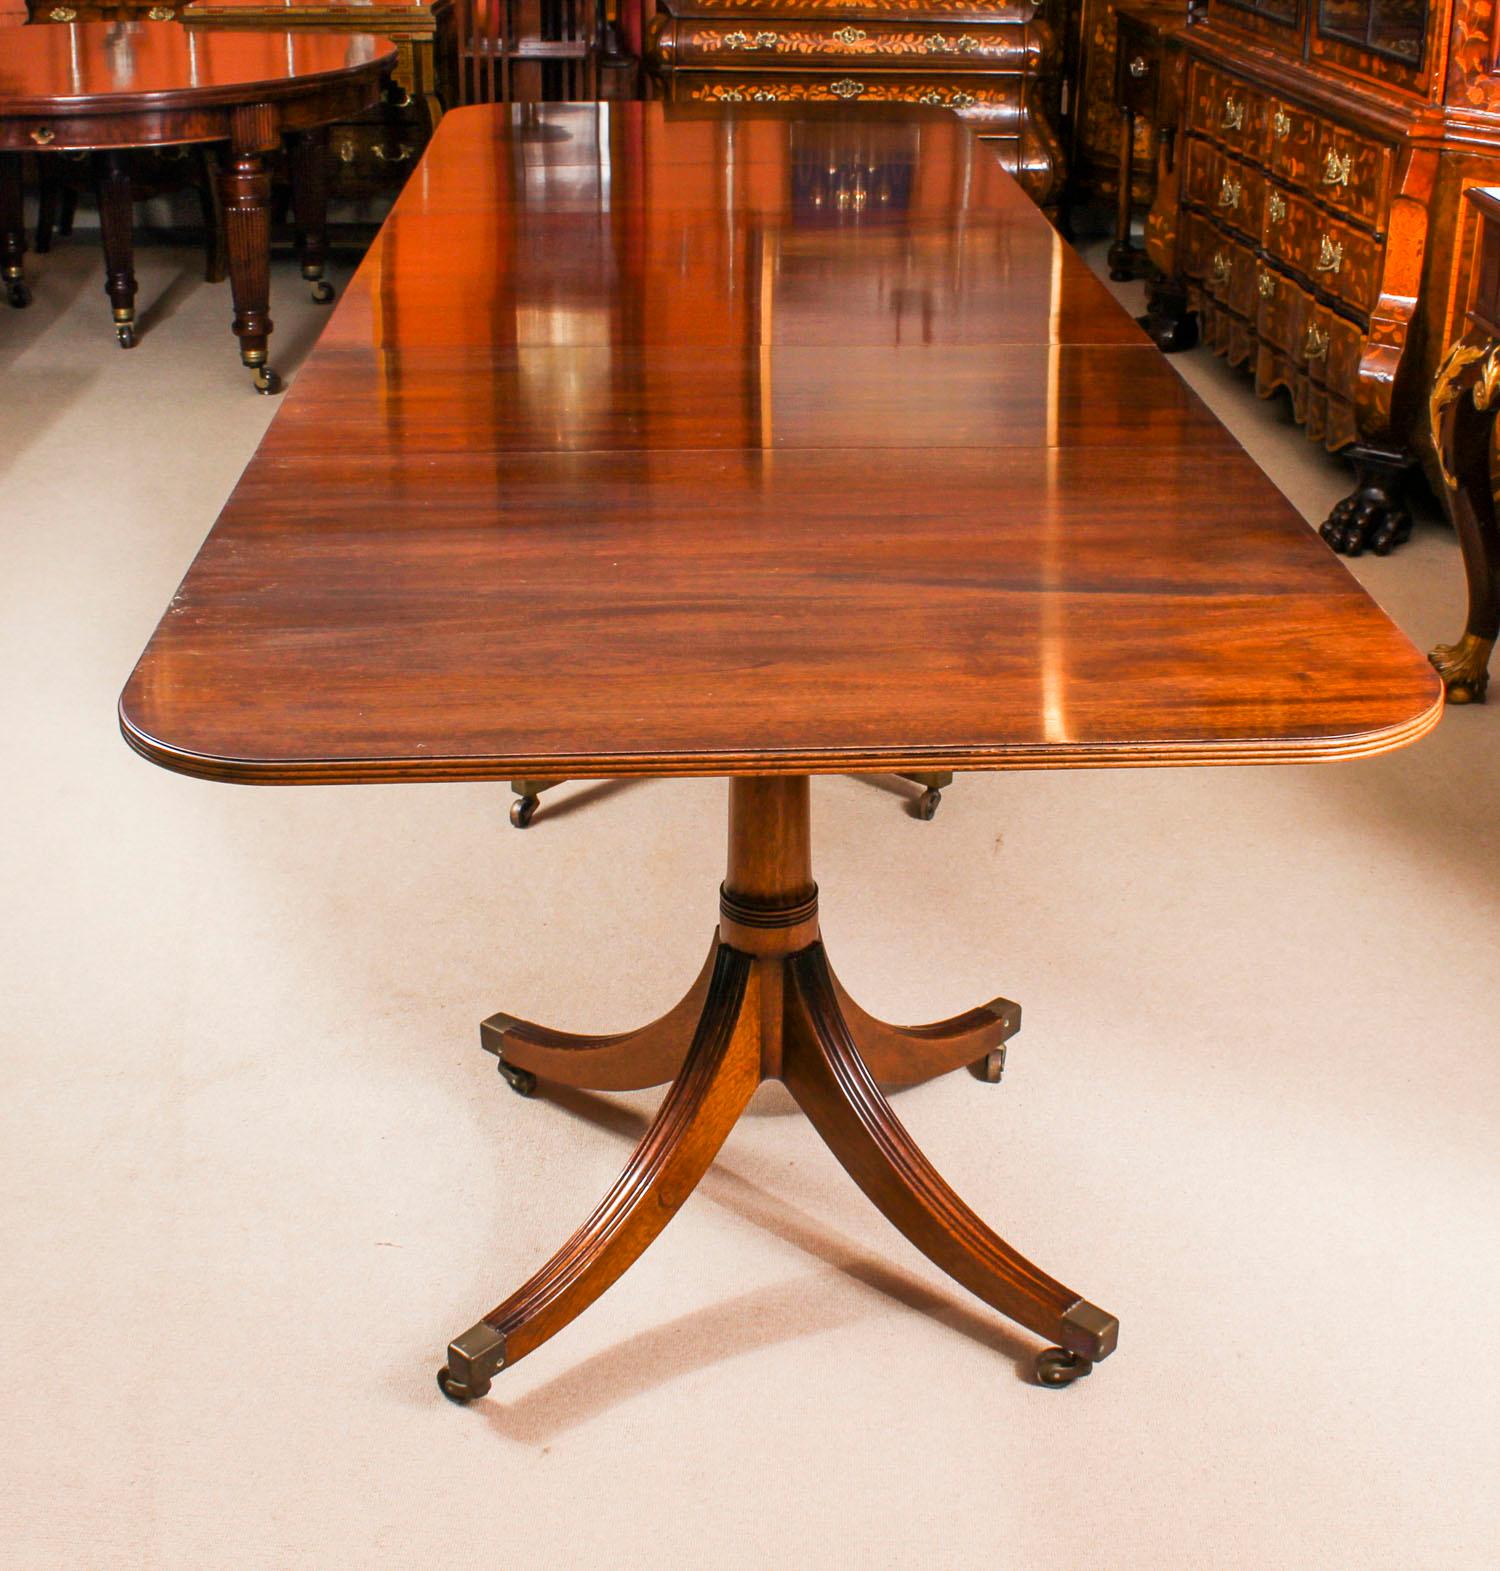 This is a fabulous high quality flame mahogany triple pillar extending dining table by the master cabinet maker, William Tillman, bought at great expense from Harrods, Knightsbridge, London in 1982.

It is raised on three gunbarrel bases, each